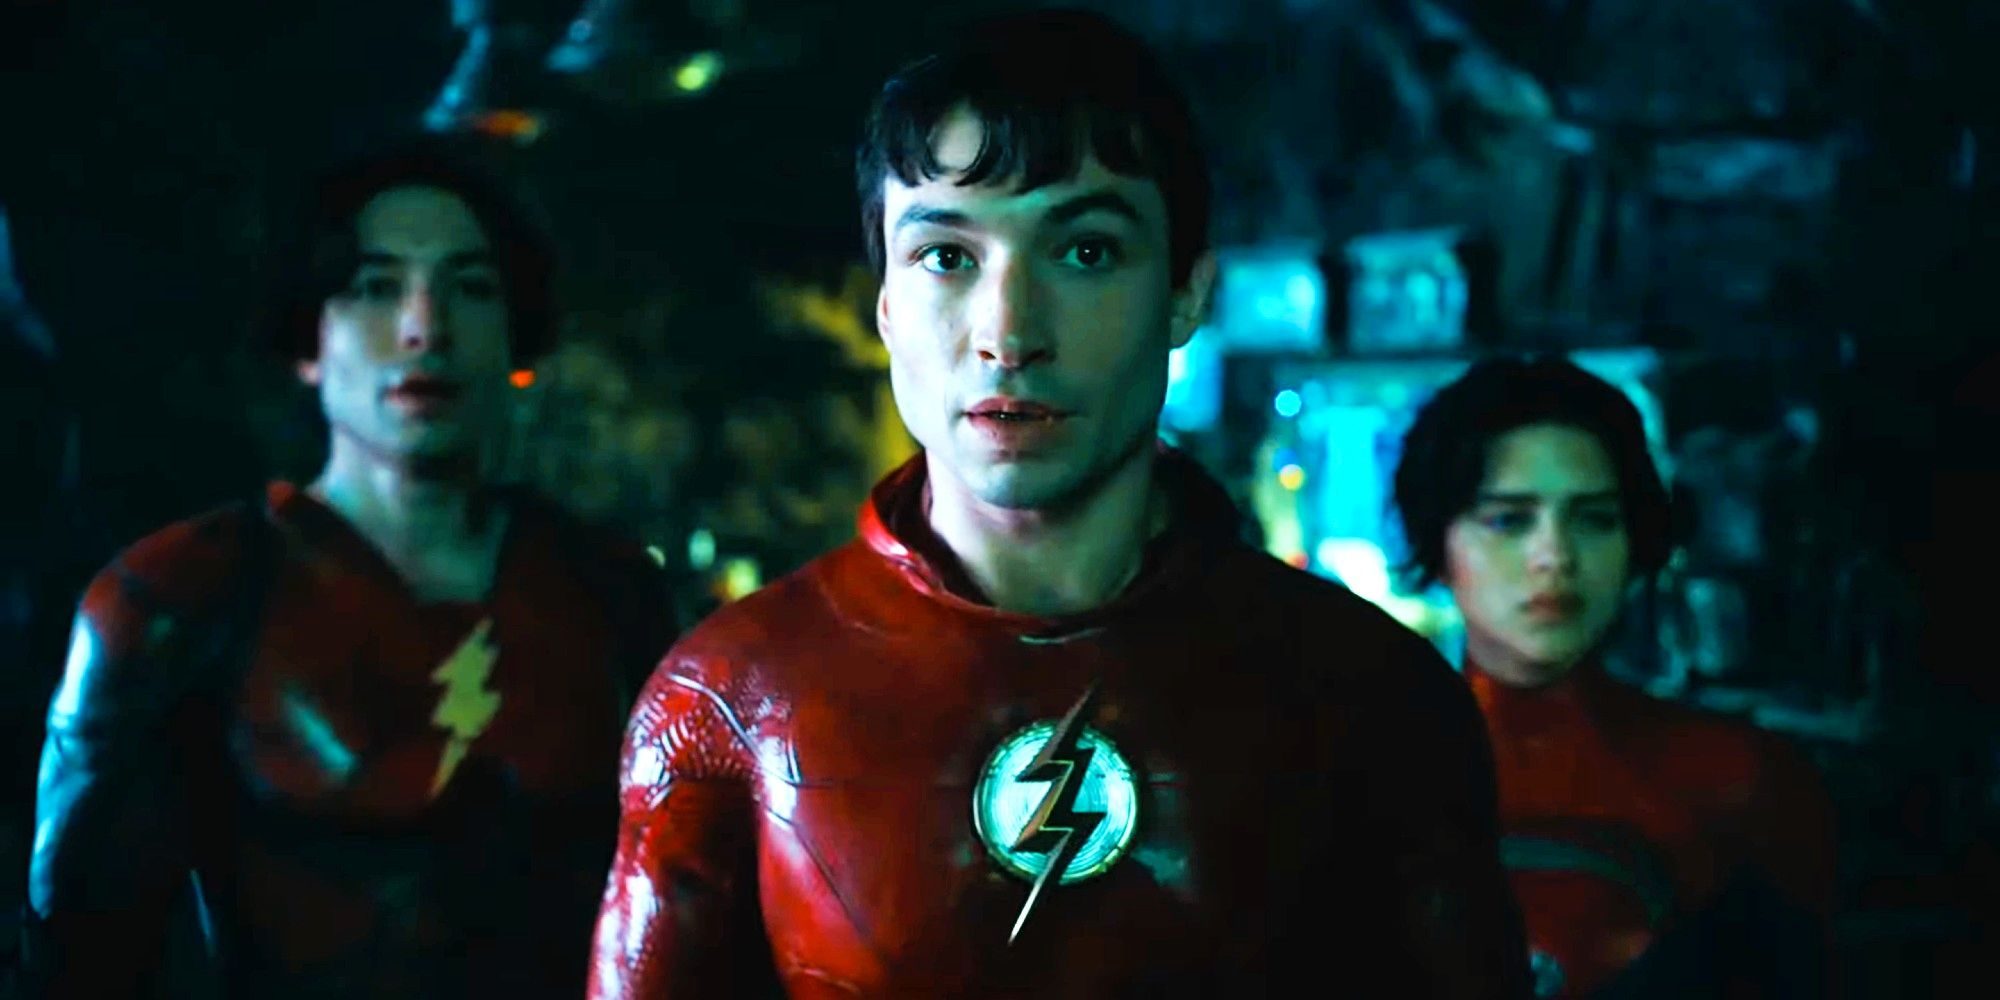 WATCH: Ezra Miller time travels and takes center stage in ‘The Flash’ trailer